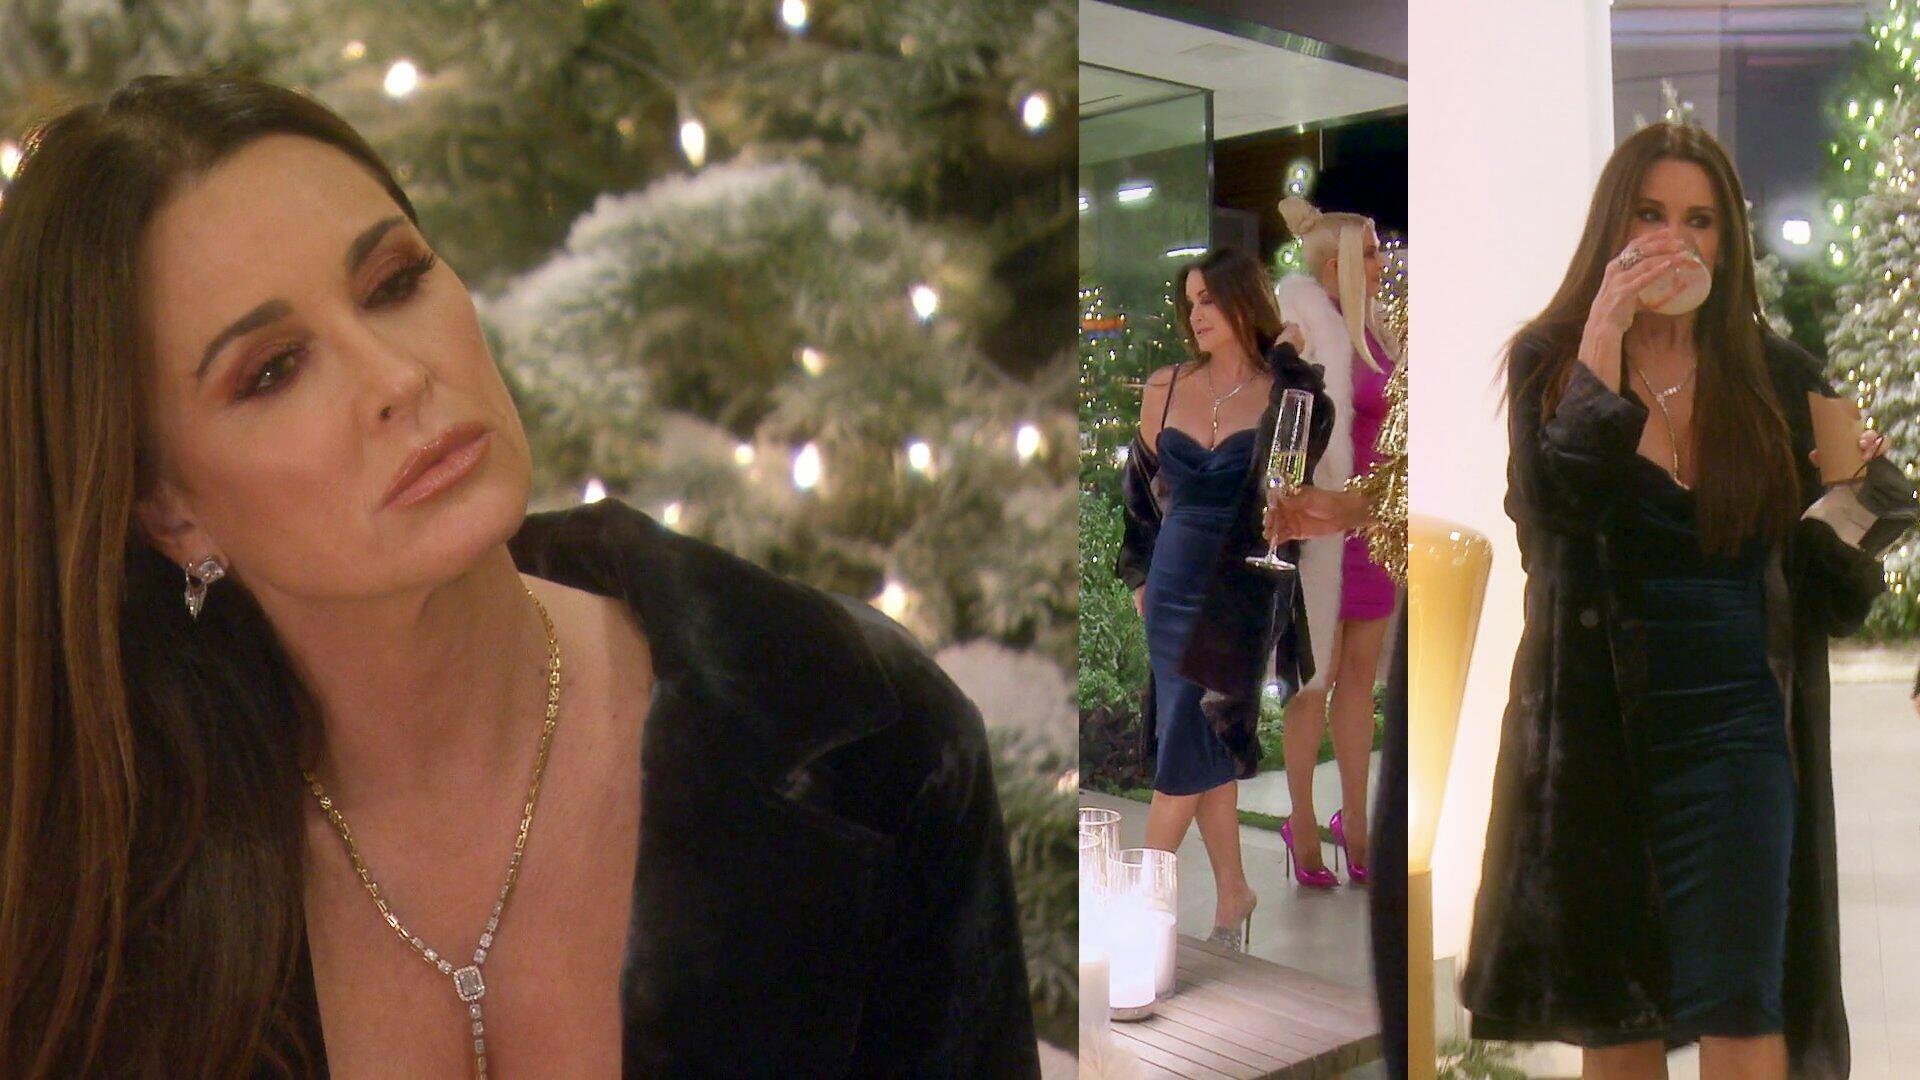 Kyle Richards - The Real Housewives of Beverly Hills | Season 12 Episode 11 | Kyle Richards style